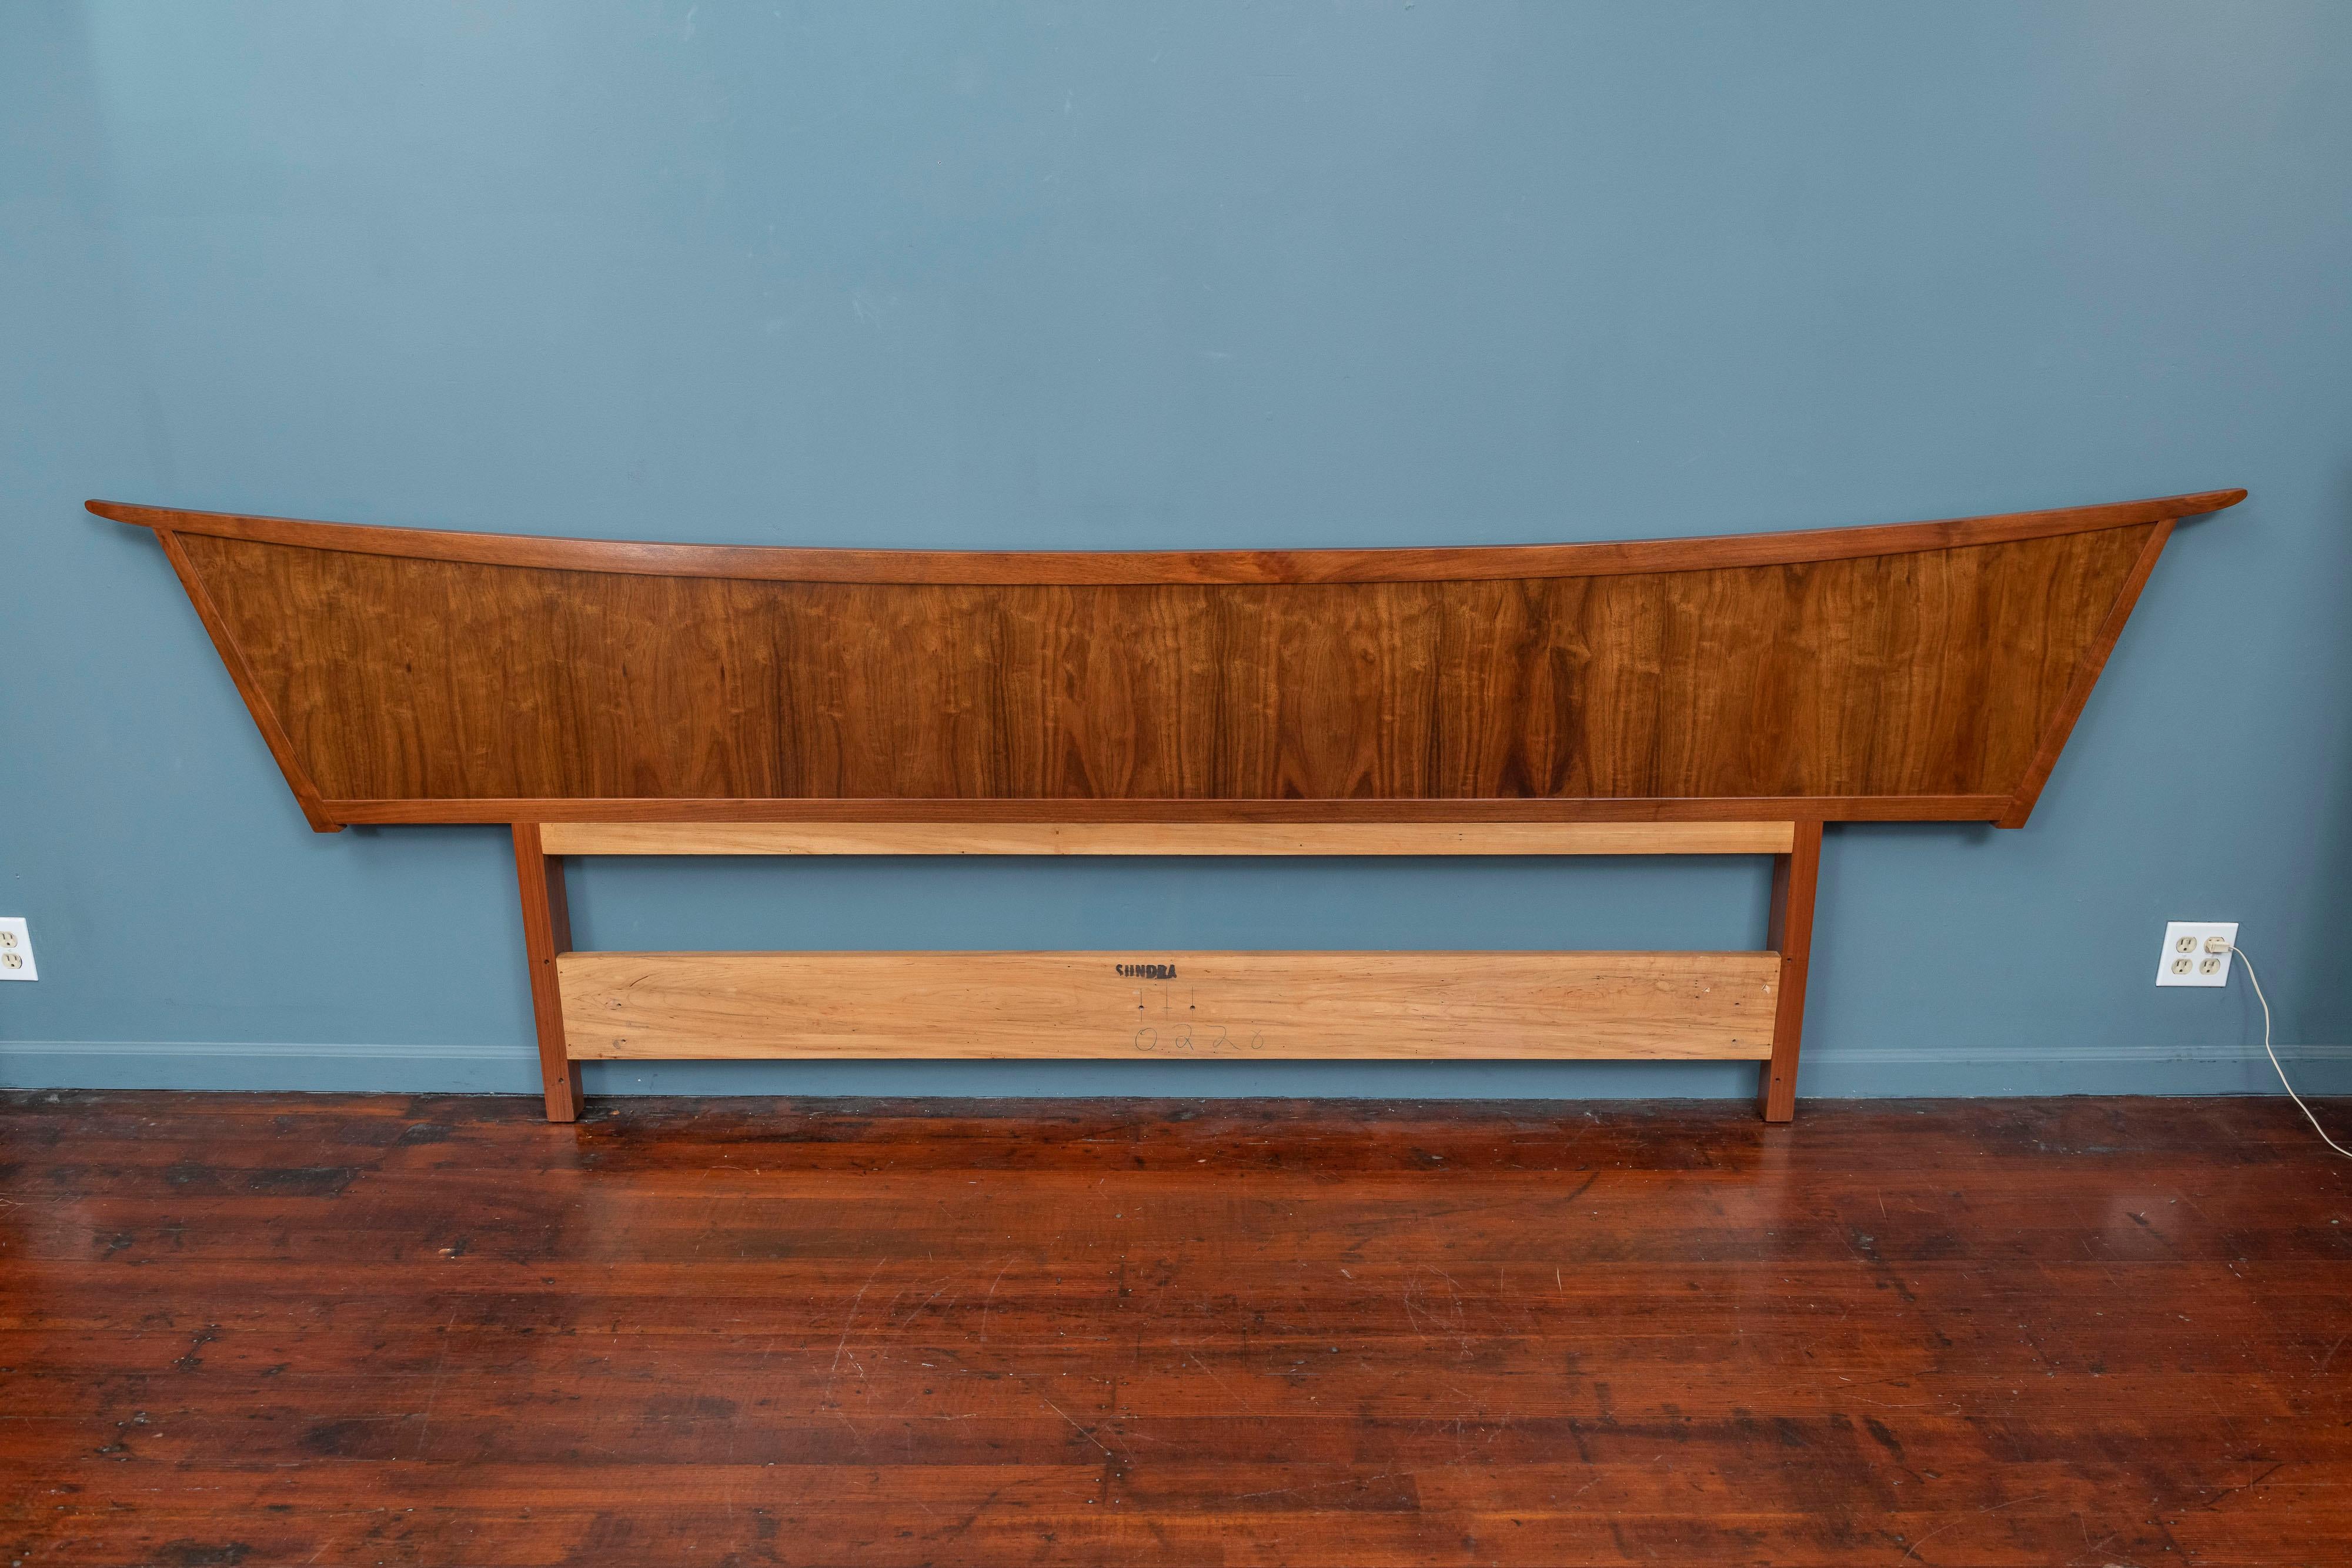 George Nakashima design headboard for a king or queen sized bed for his Origins series by Widdicomb, 1959. Constructed of East Indian Laurel wood in the original Sundra finish, cleaned and waxed and ready to install. The complete bedroom set is